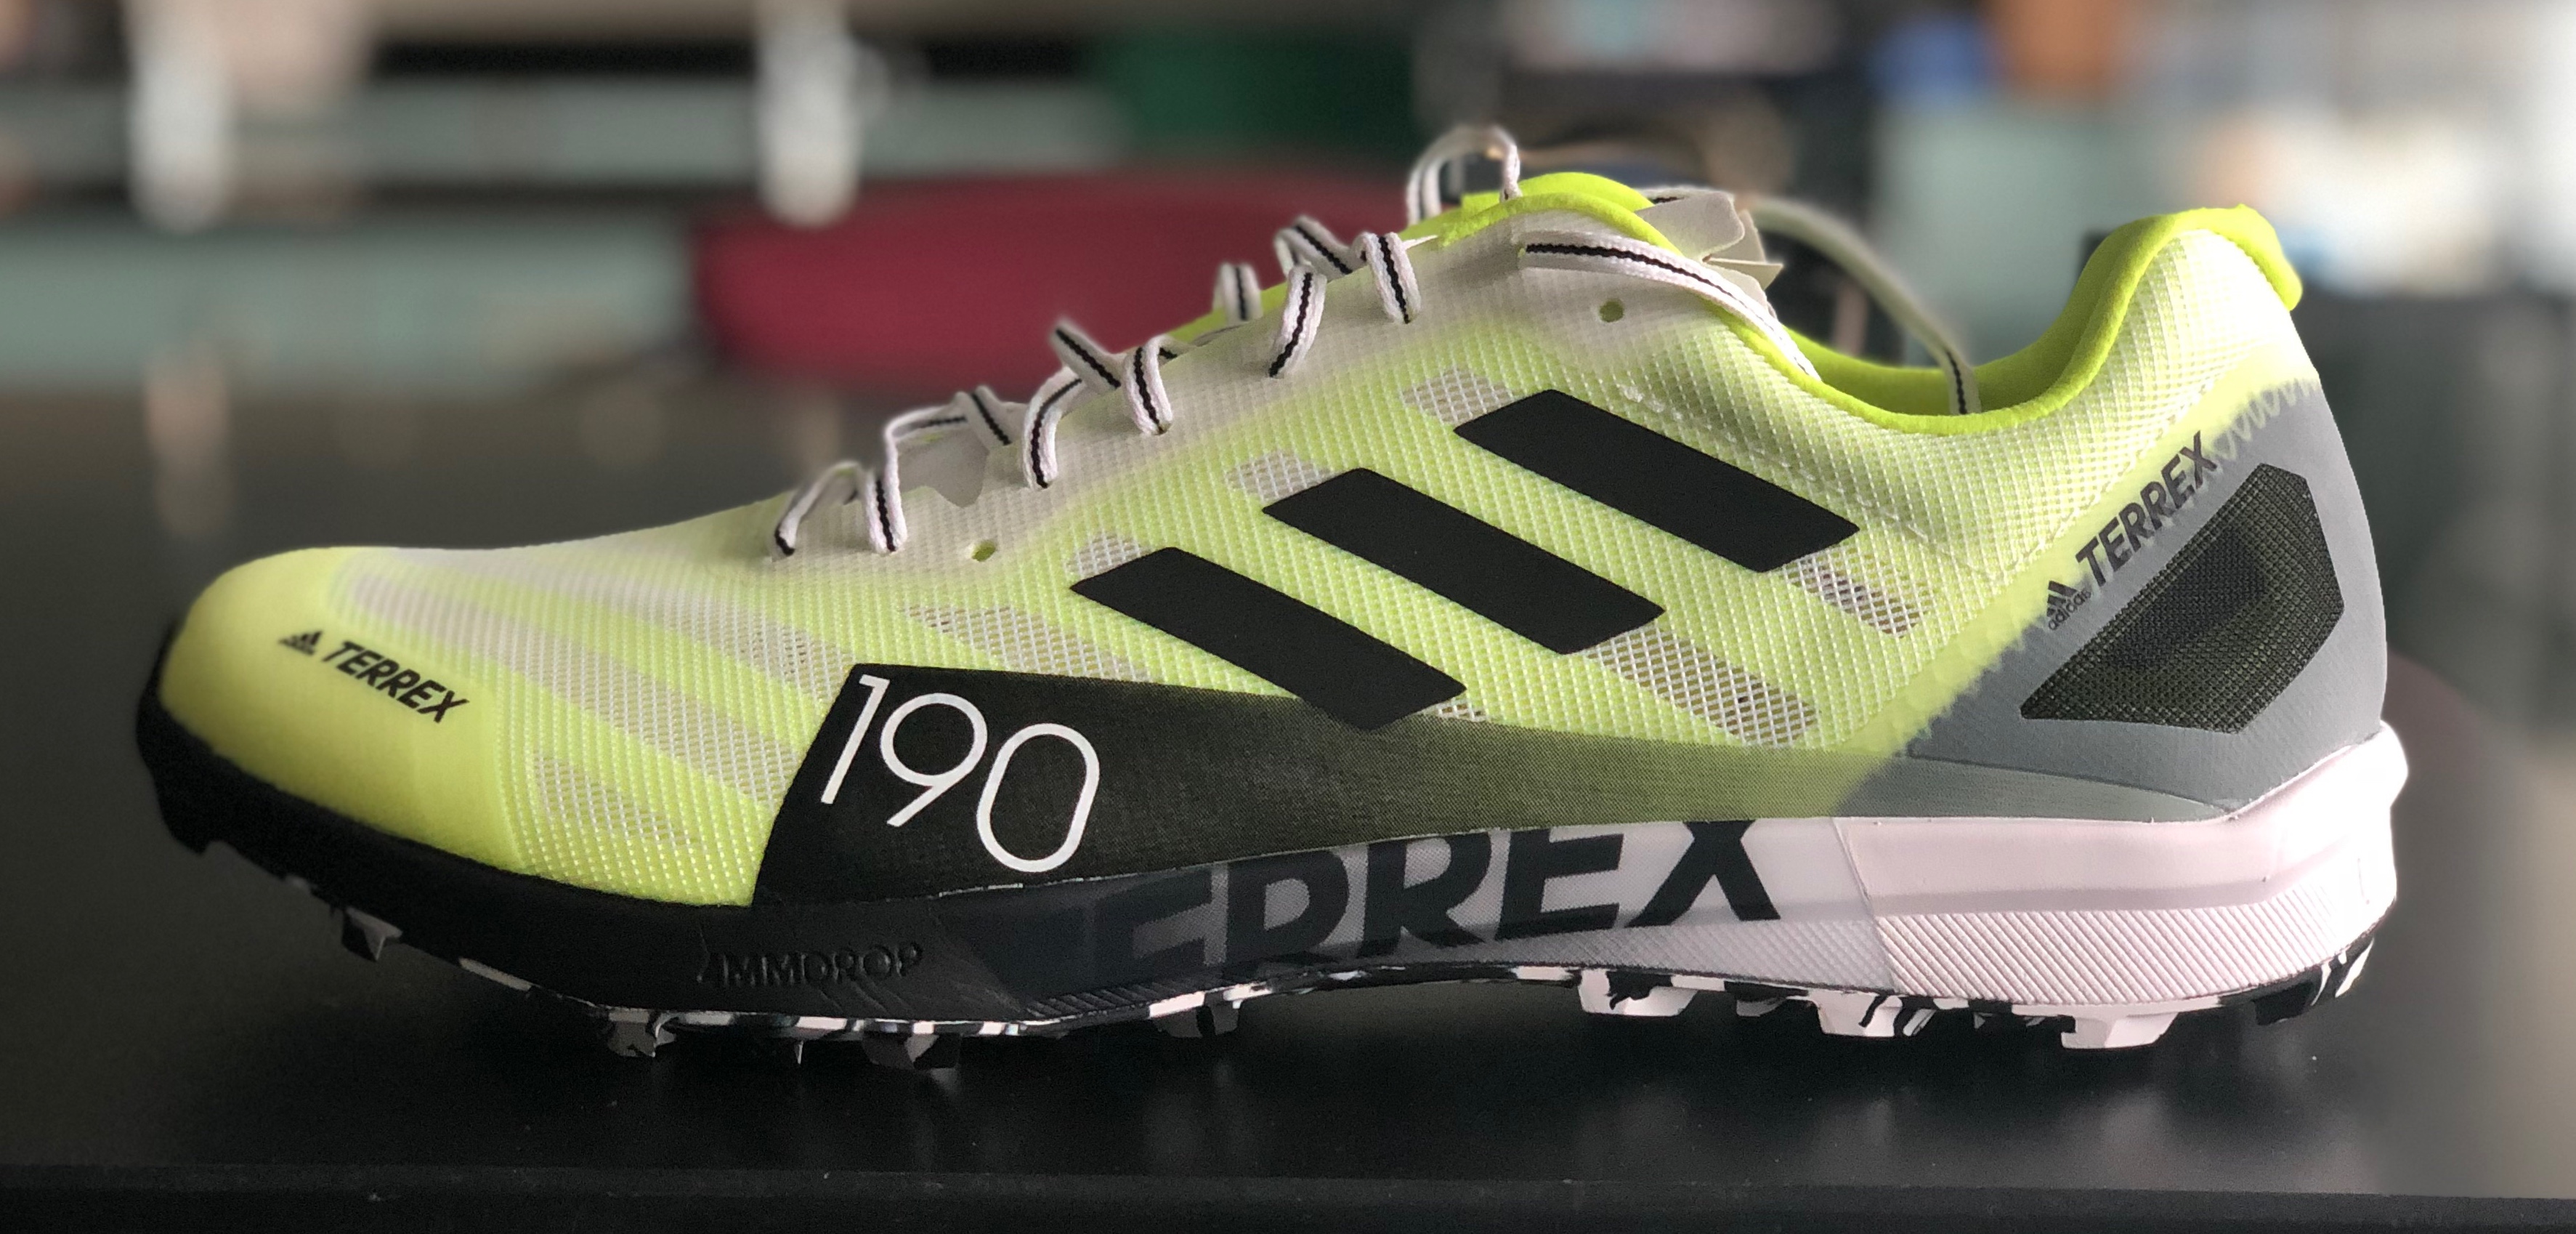 formato basura cascada Adidas Terrex Speed Pro Shoe Review: A Racing Flat for the Trails